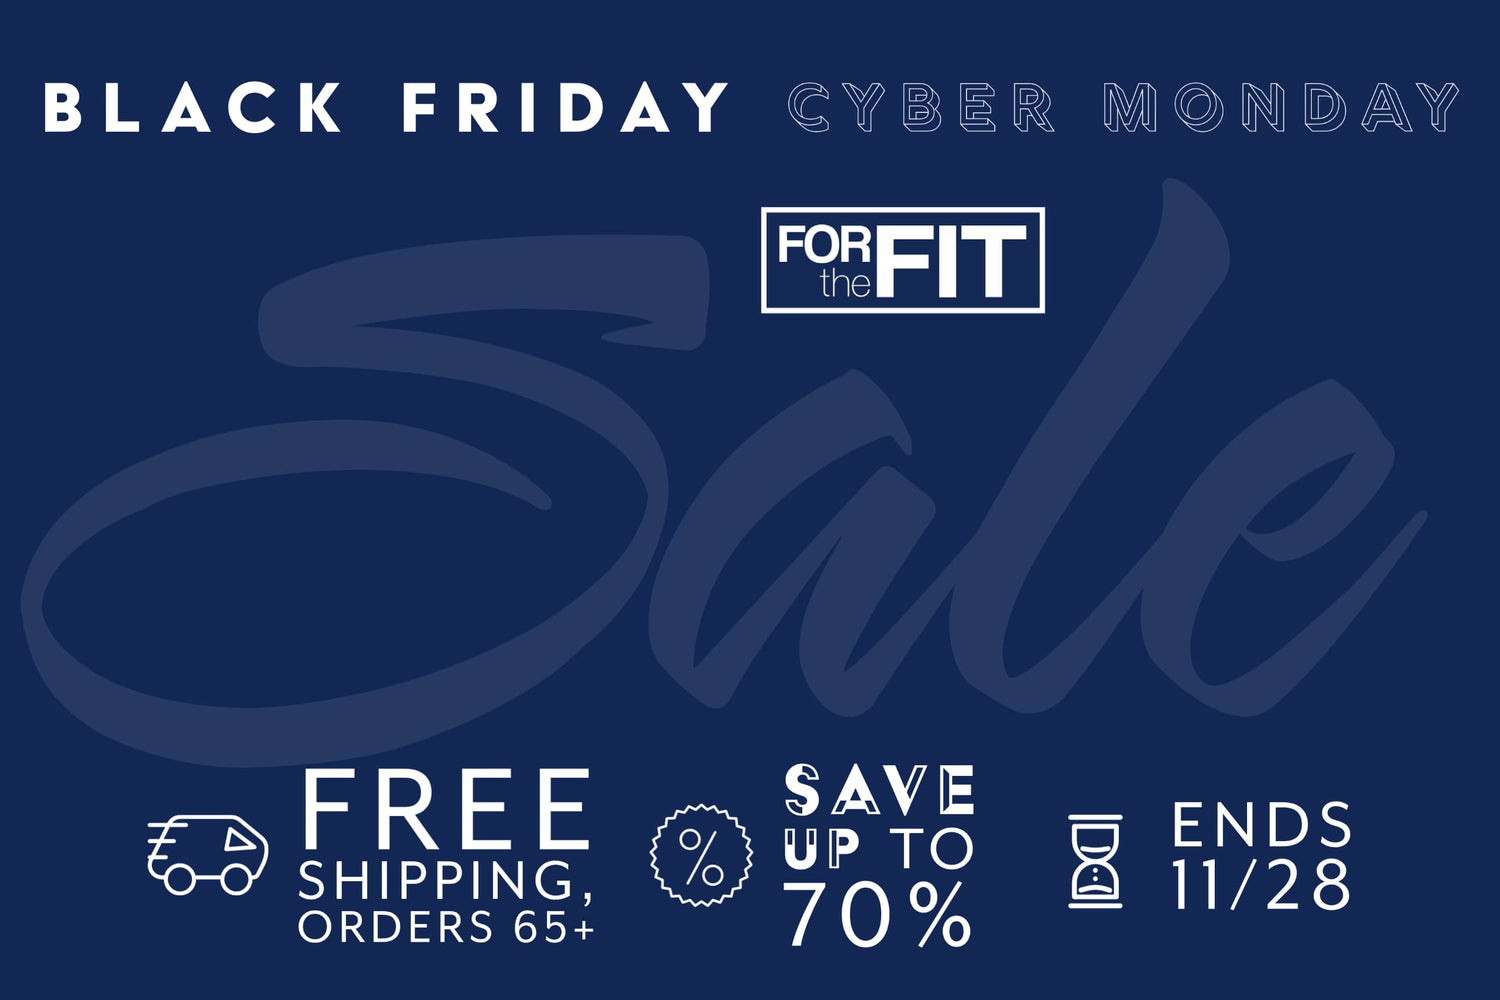 Save on Short Men's Clothing and Tall Men's Clothing Sizes. Petite and Tall Women's Styles are on Sale Now.  Preview our Black Friday Event to Save 20 to 75% off on Premium Designs and Quality Apparel that FITs you - Tall, Short or Petite.  